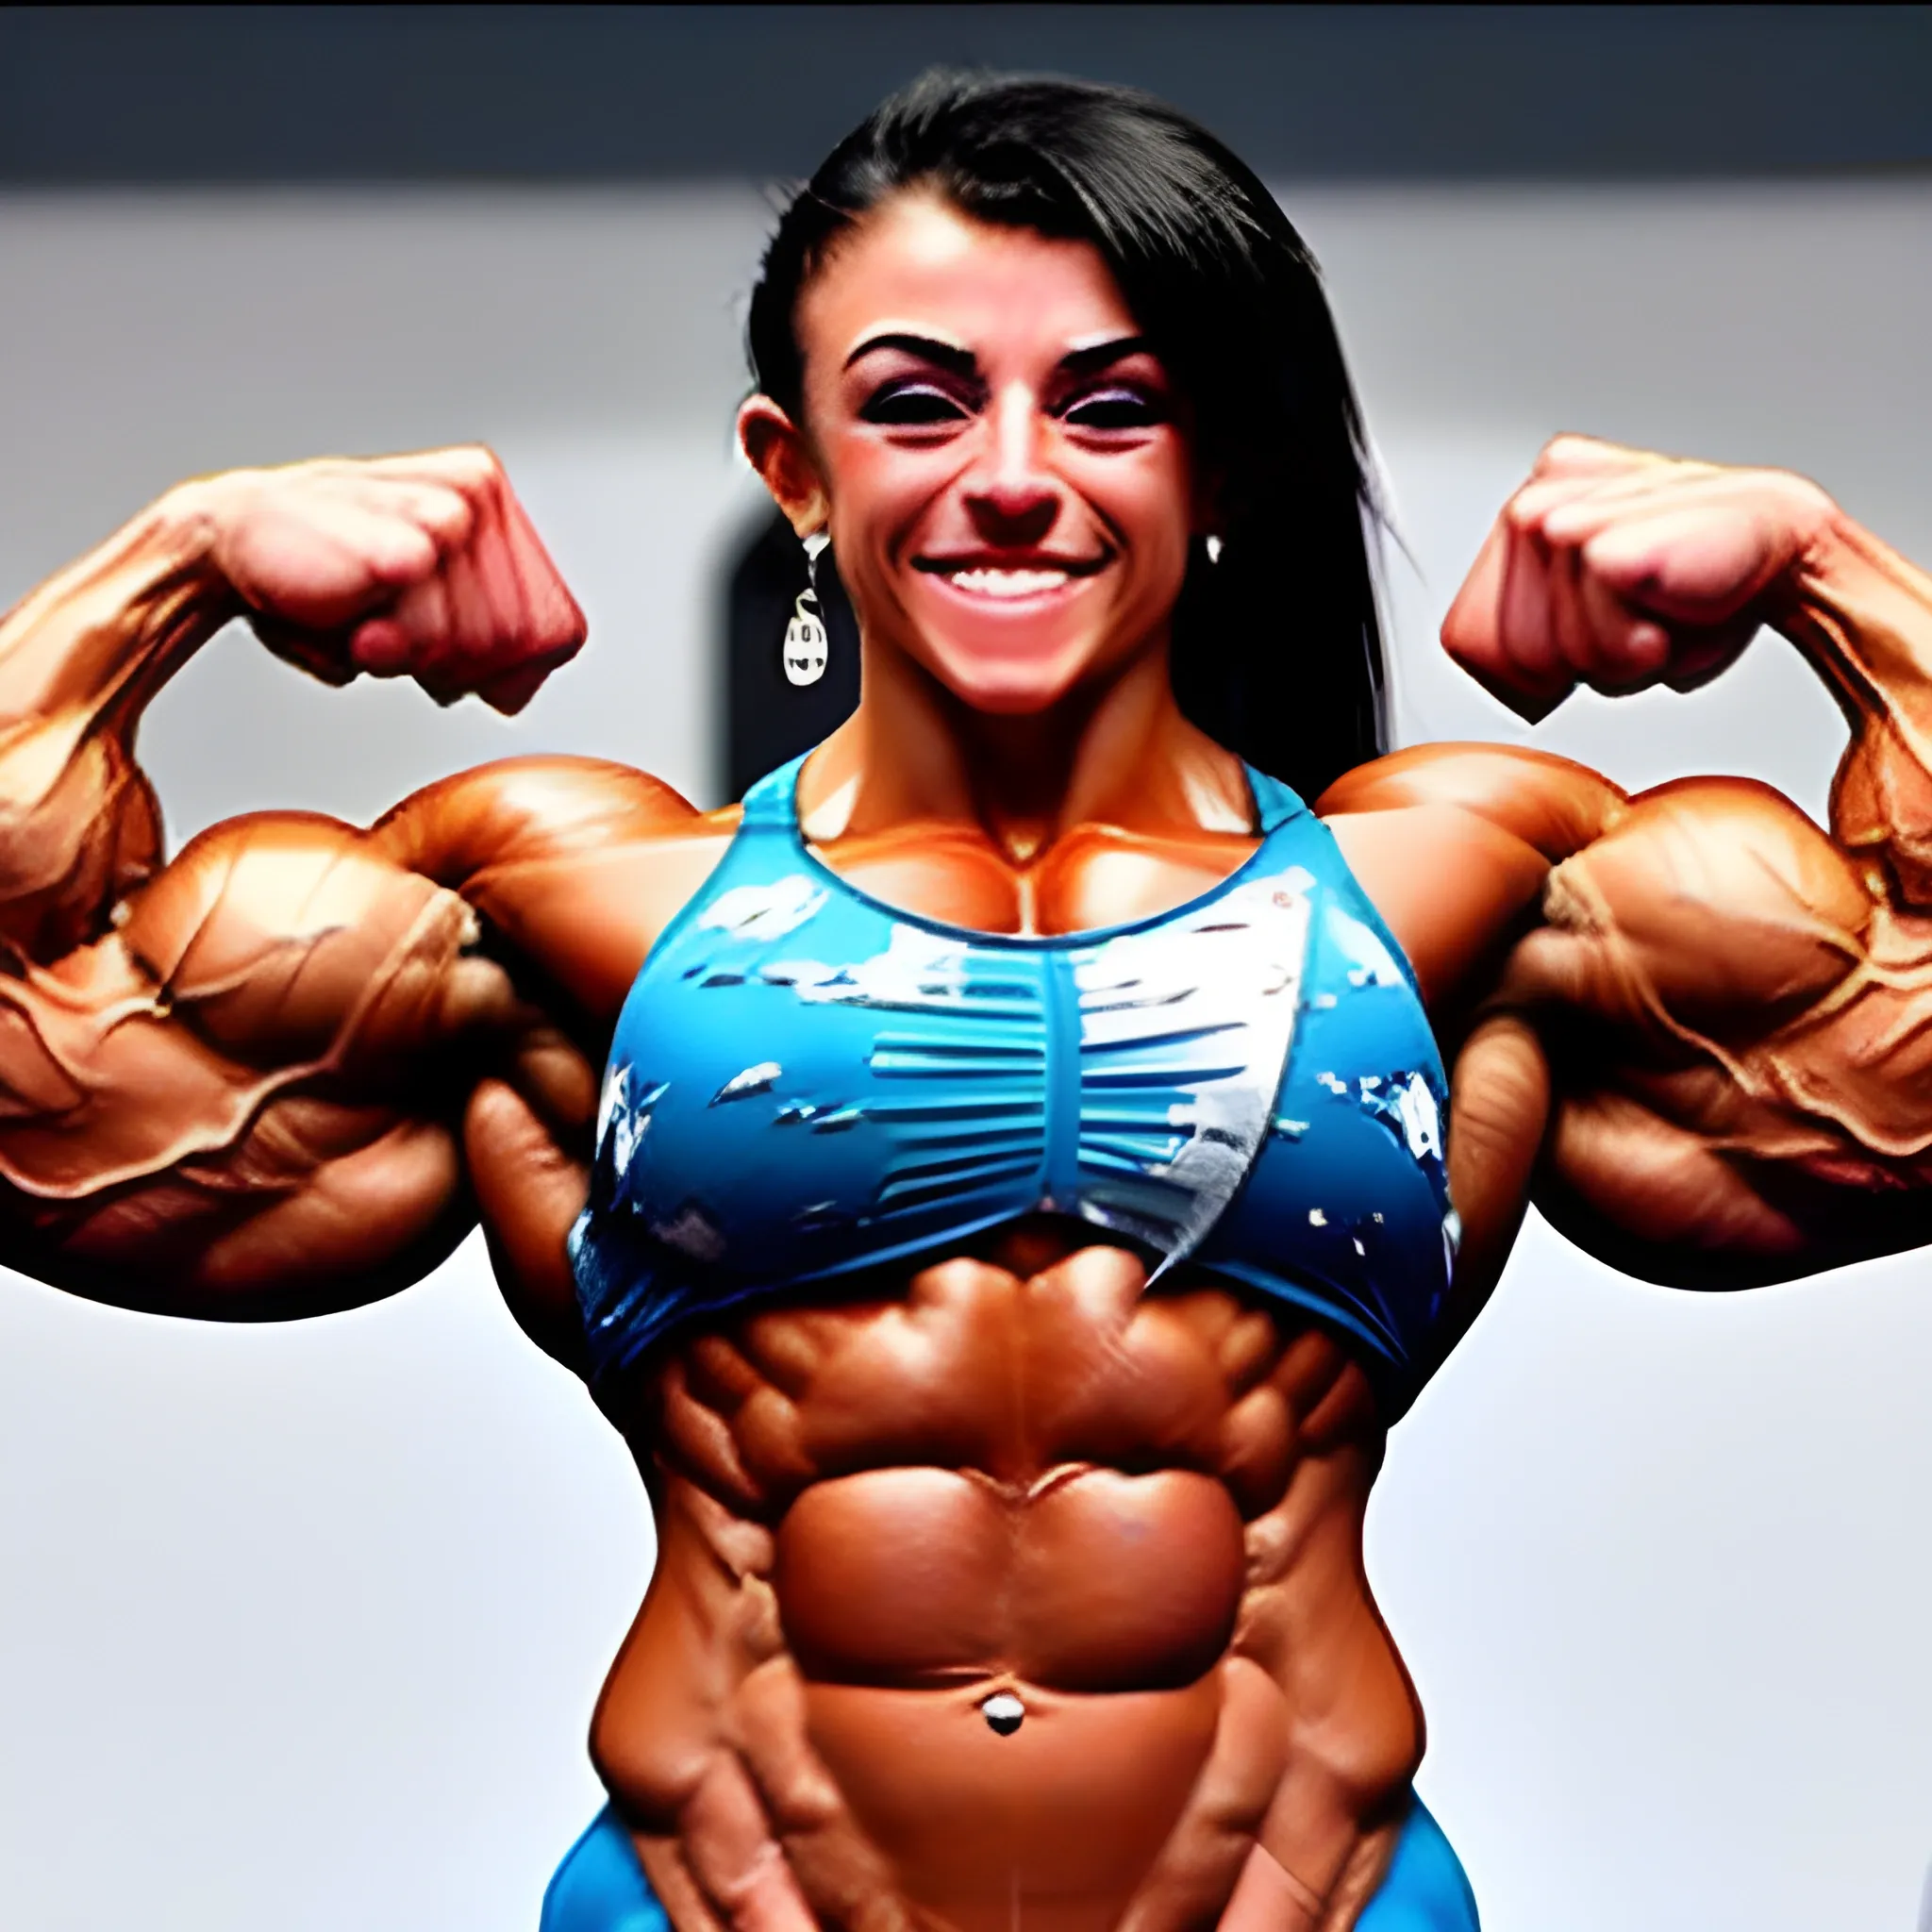 20 year old hyper-muscled female bodybuilder with 25 inch biceps